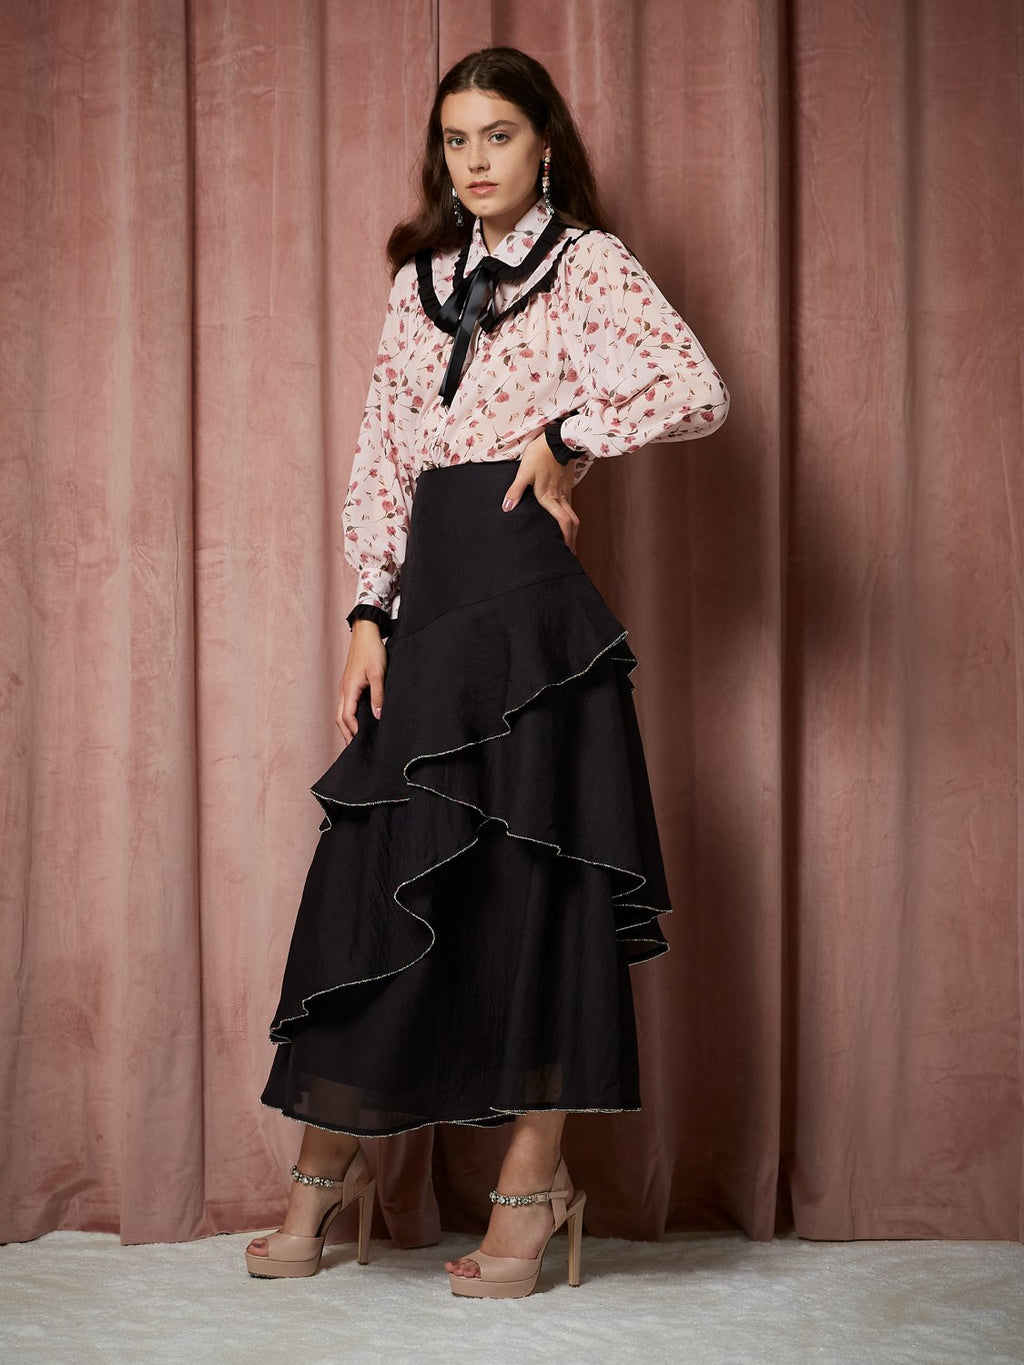 Sister Jane Spiral Gem Tiered black Midi skirt in a soft organza fabric, featuring an asymmetric tiered skirt, finished with a rainbow gem trim.